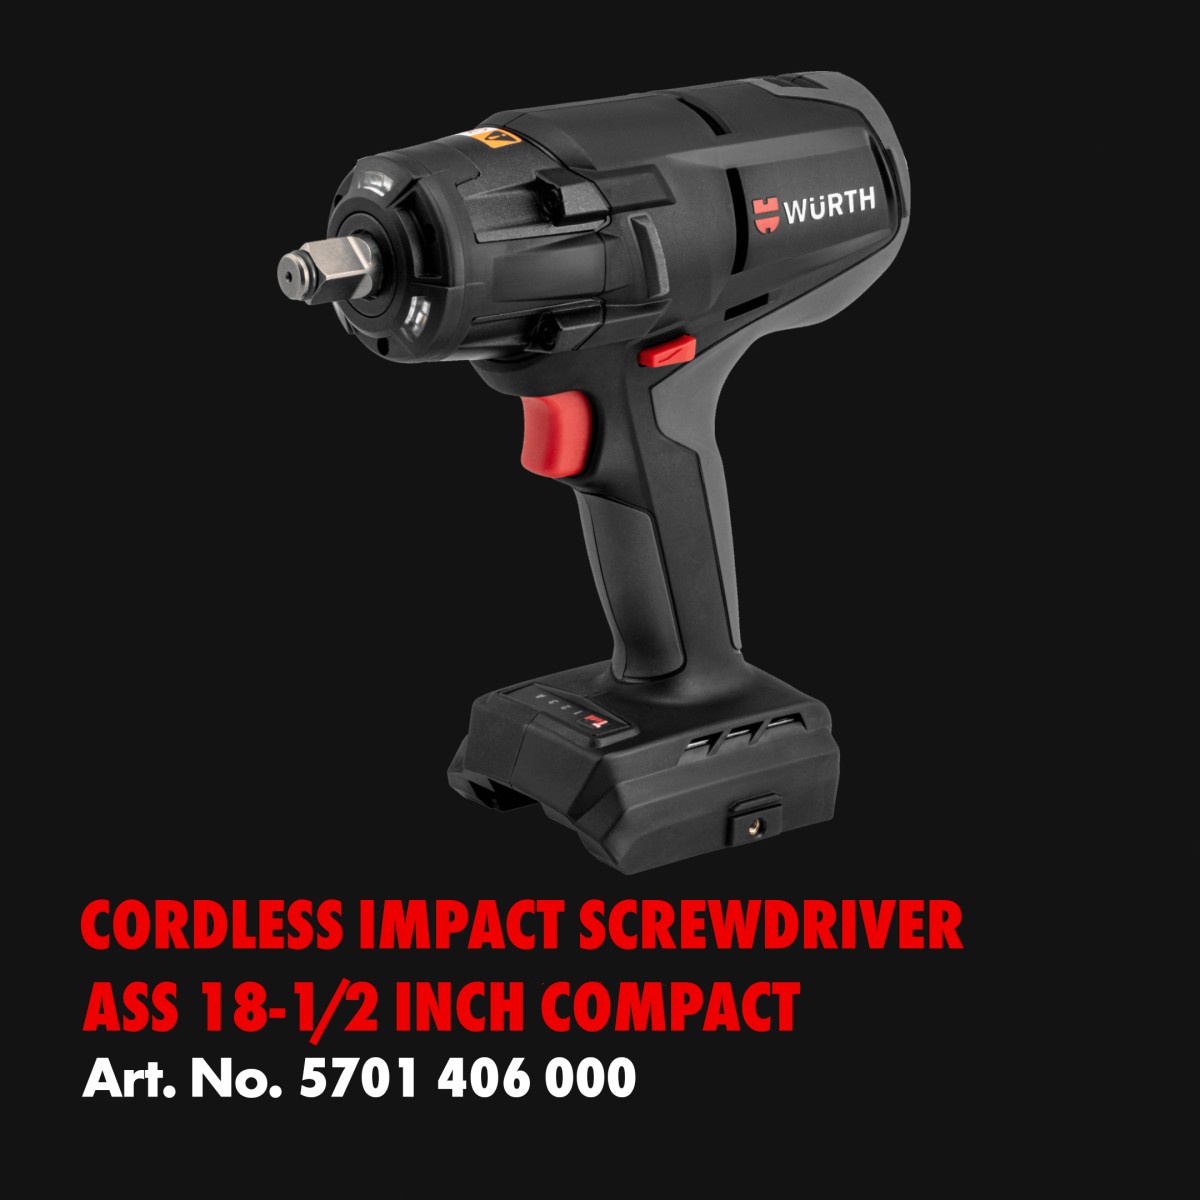 Cordless Impact Screwdriver ASS 18-1/2 Inch Compact